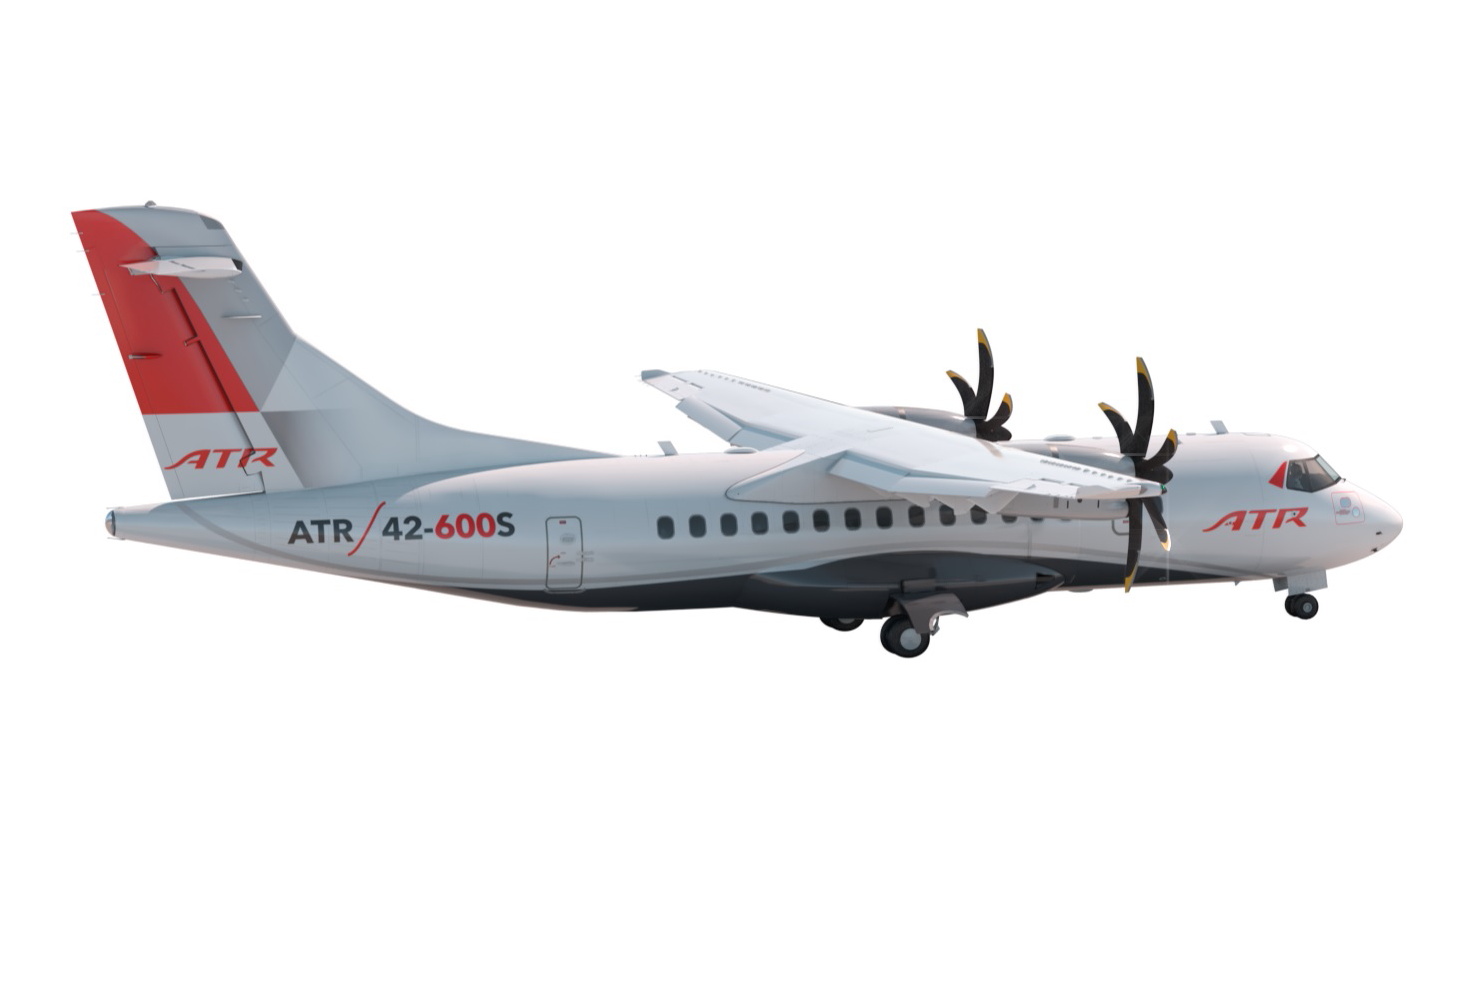 The ATR 42-600S is currently under development and will offer take-off and landing capabilities on runways as short as 800 meters with 40 passengers on board in standard flight conditions. Click to enlarge.